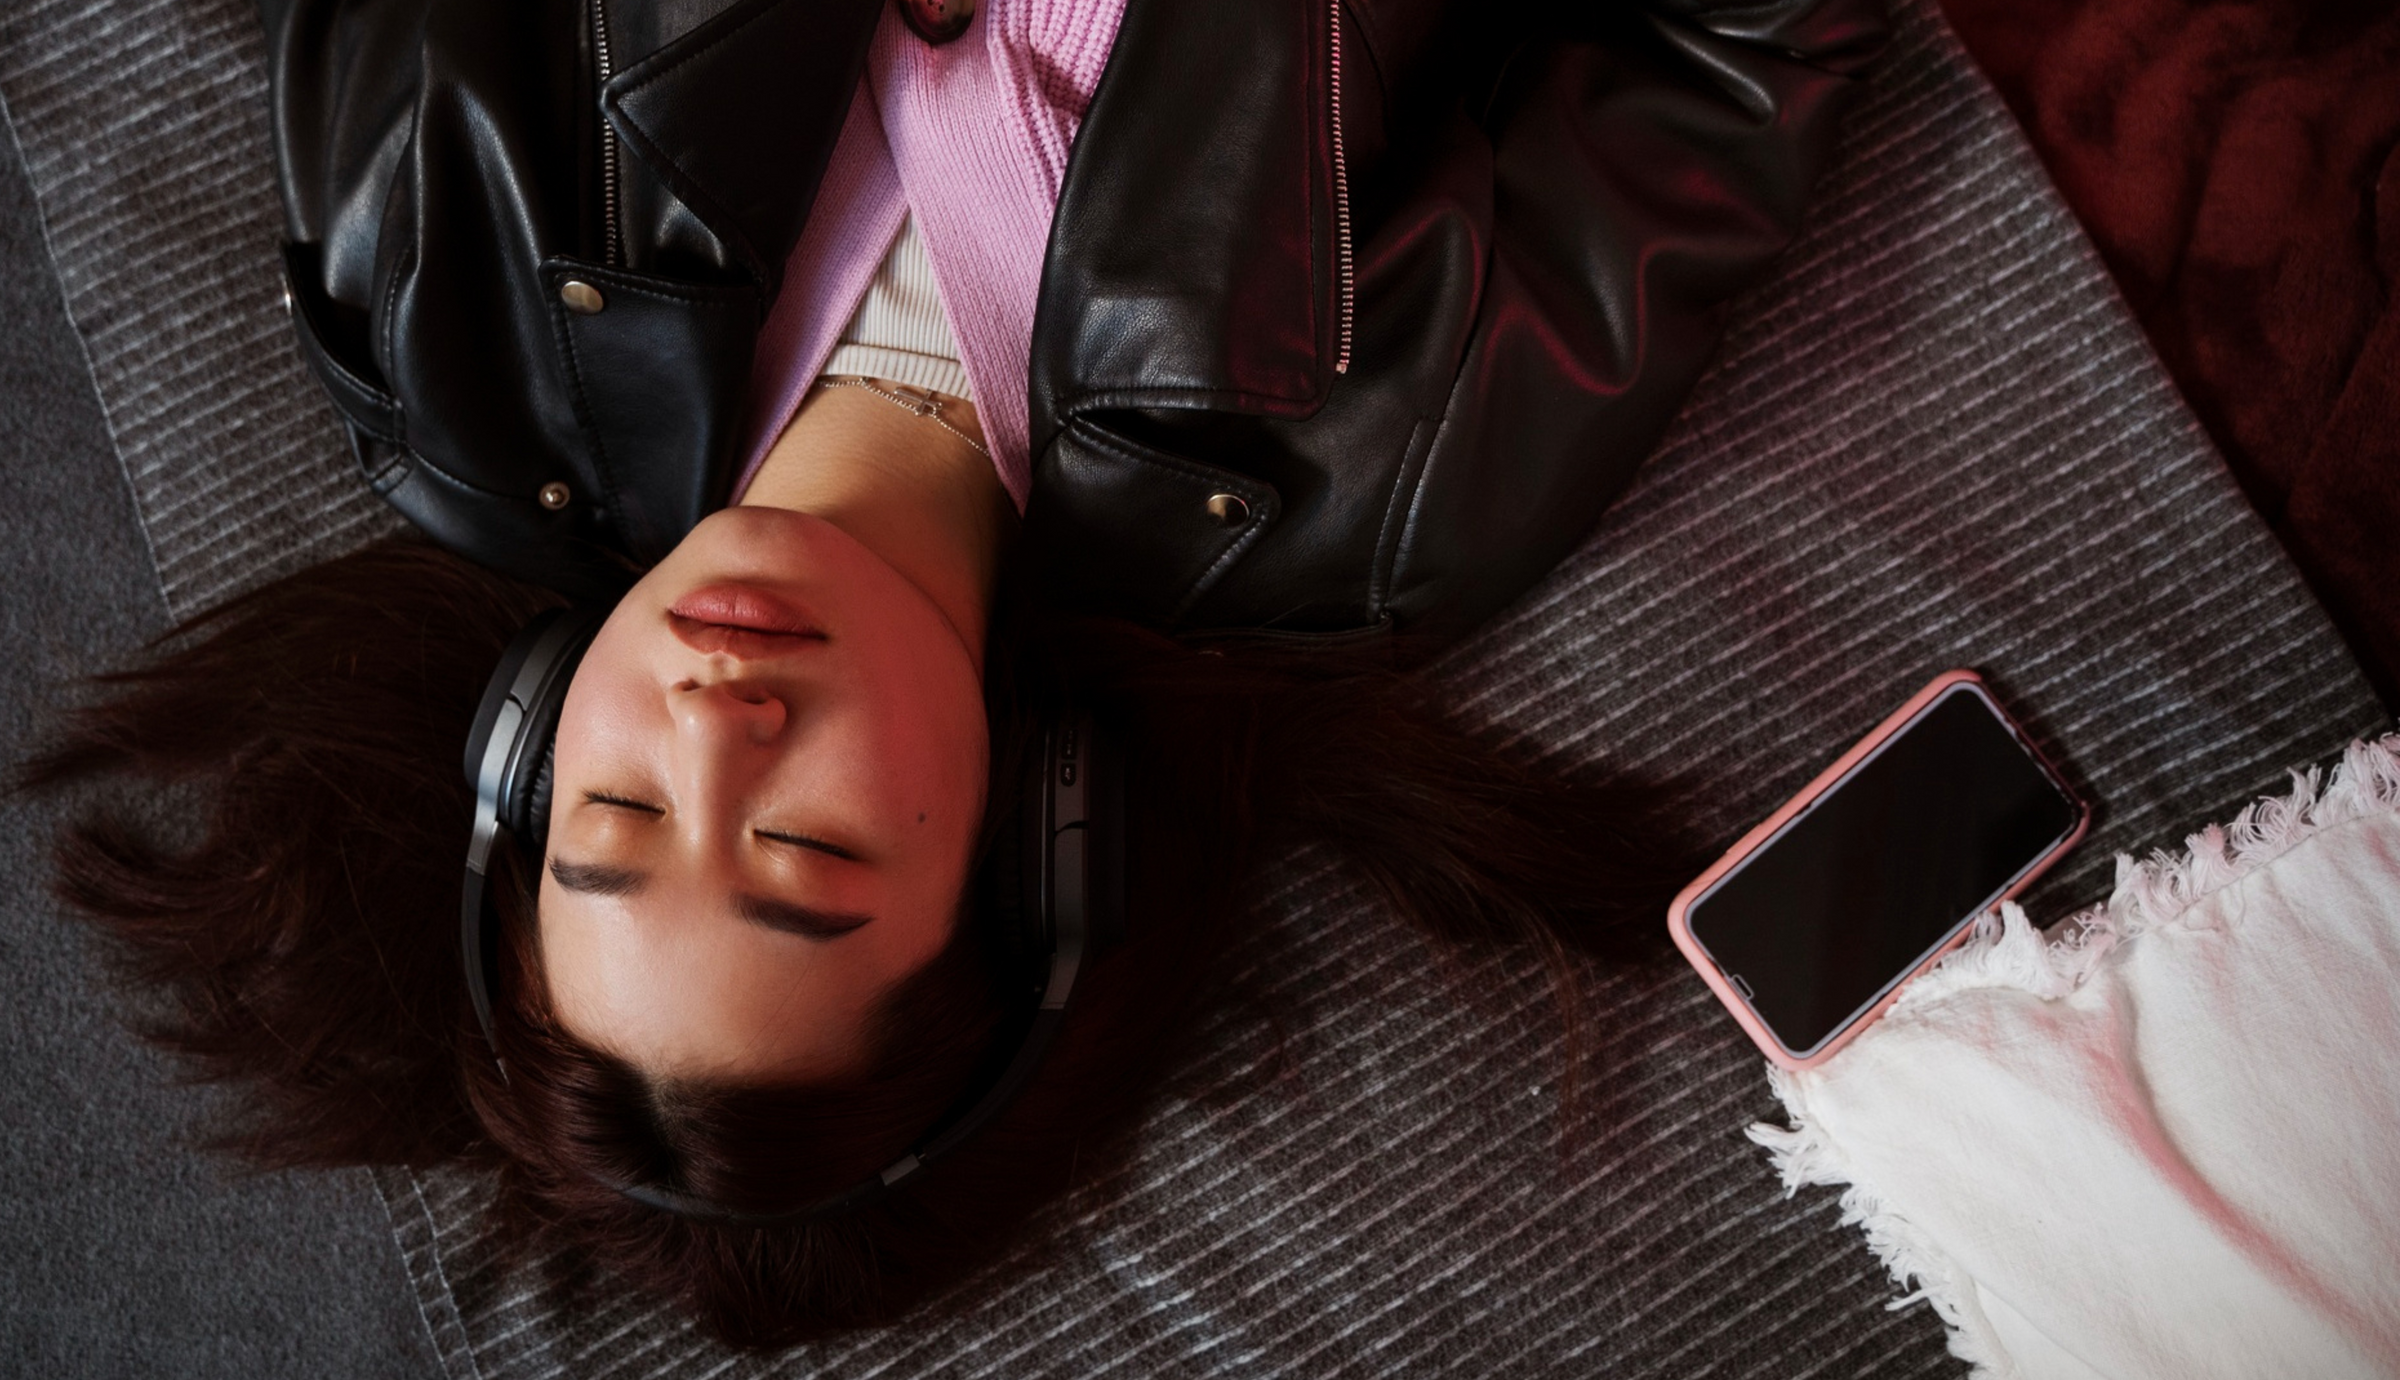 Young Woman Having a wonderful time sleeping - PulsePlay Tech